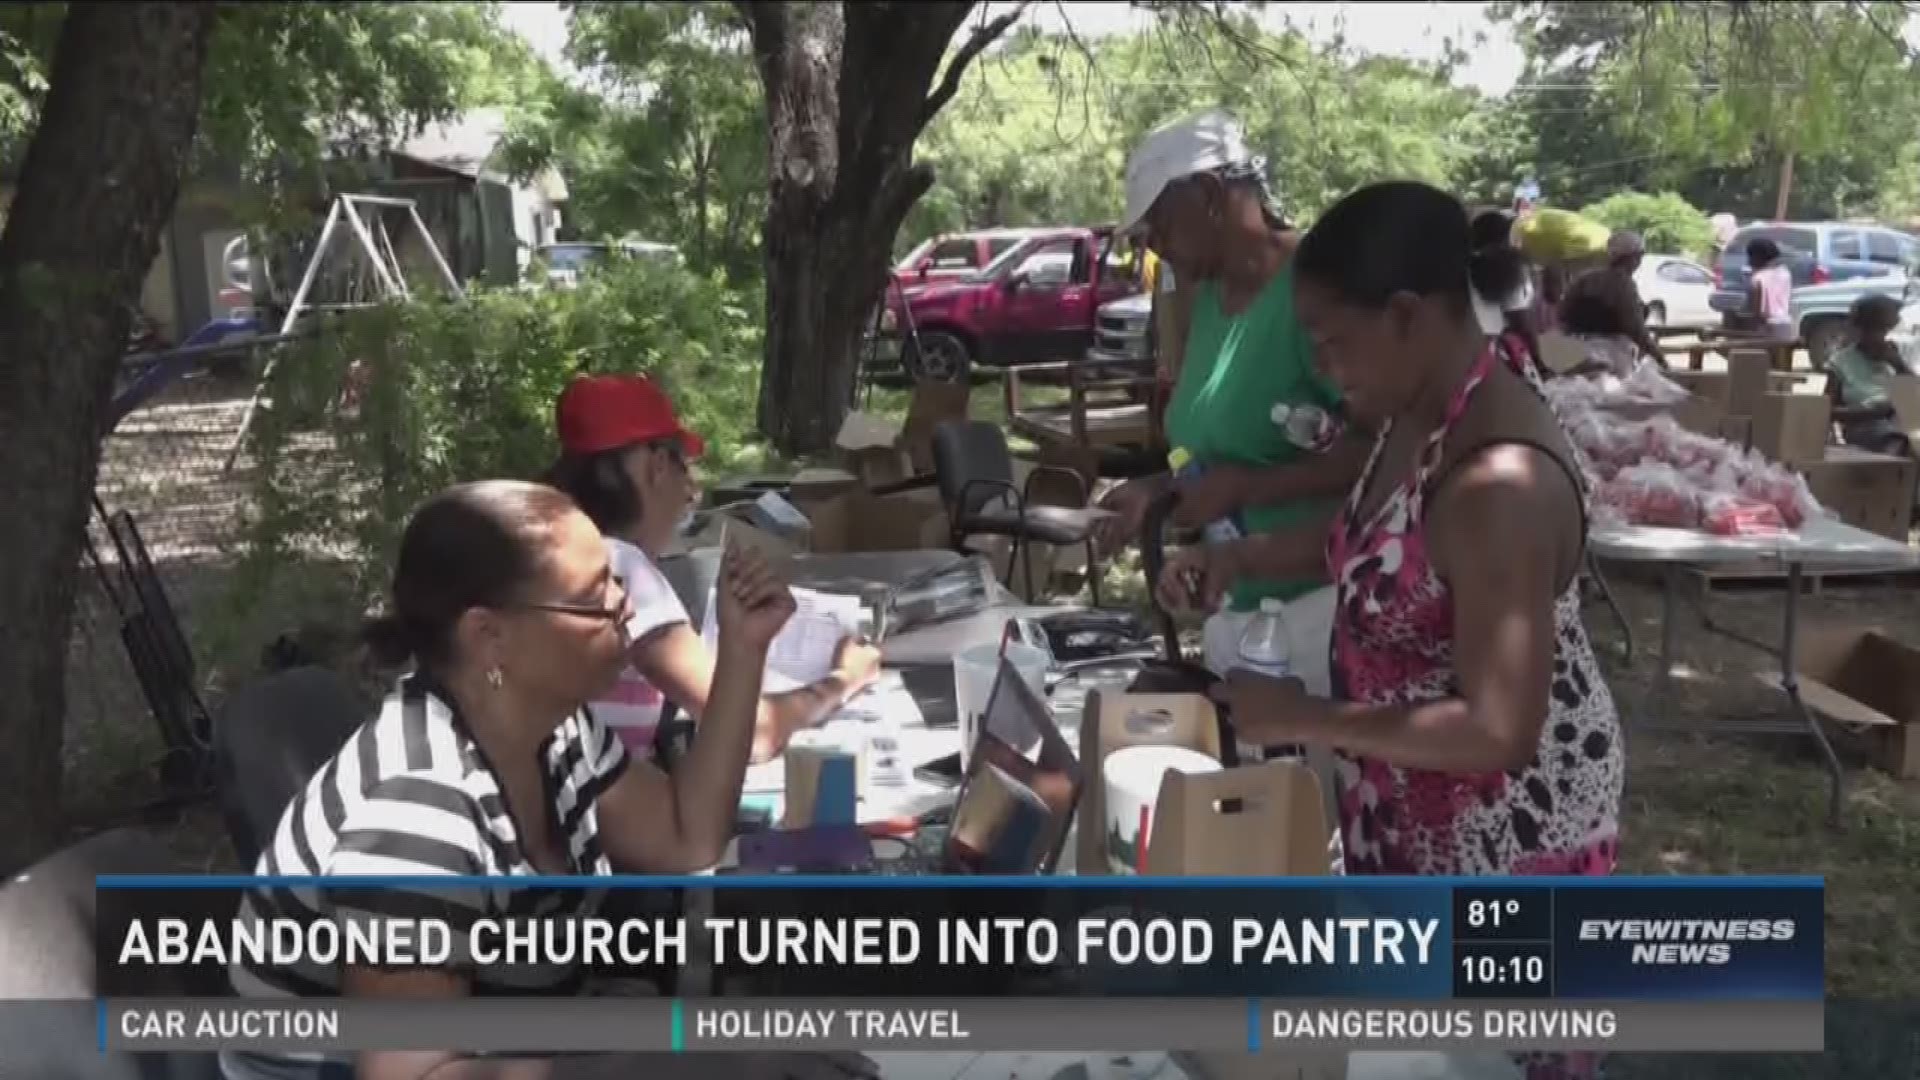 Abandoned church turned into food pantry